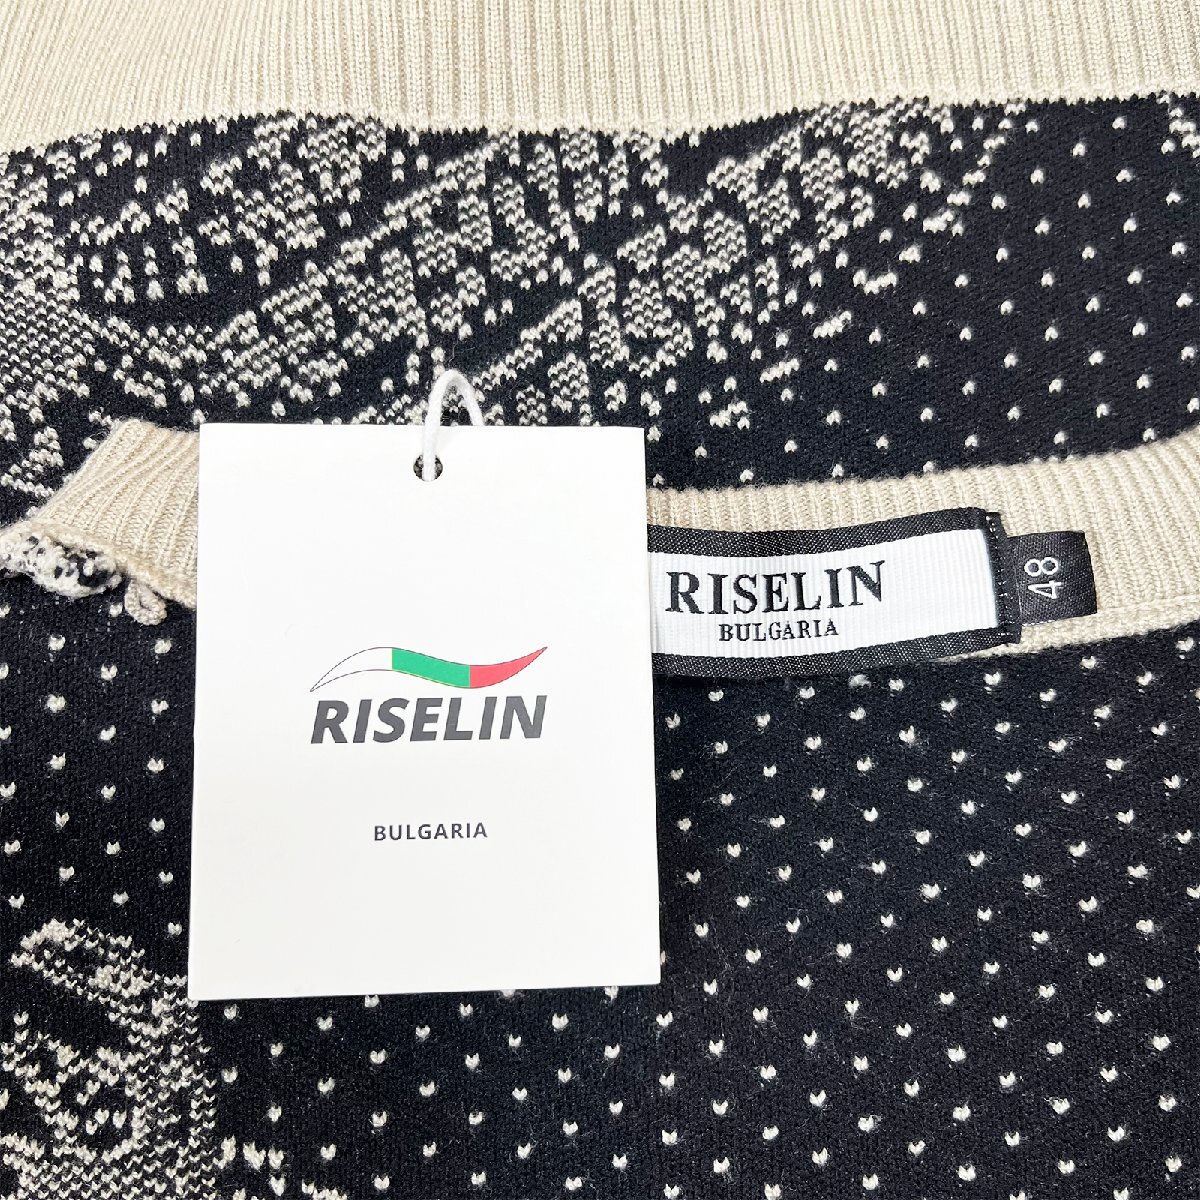  piece . Europe made * regular price 5 ten thousand * BVLGARY a departure *RISELIN sweater comfortable knitted warm total pattern solid feeling pull over tops Trend L/48 size 